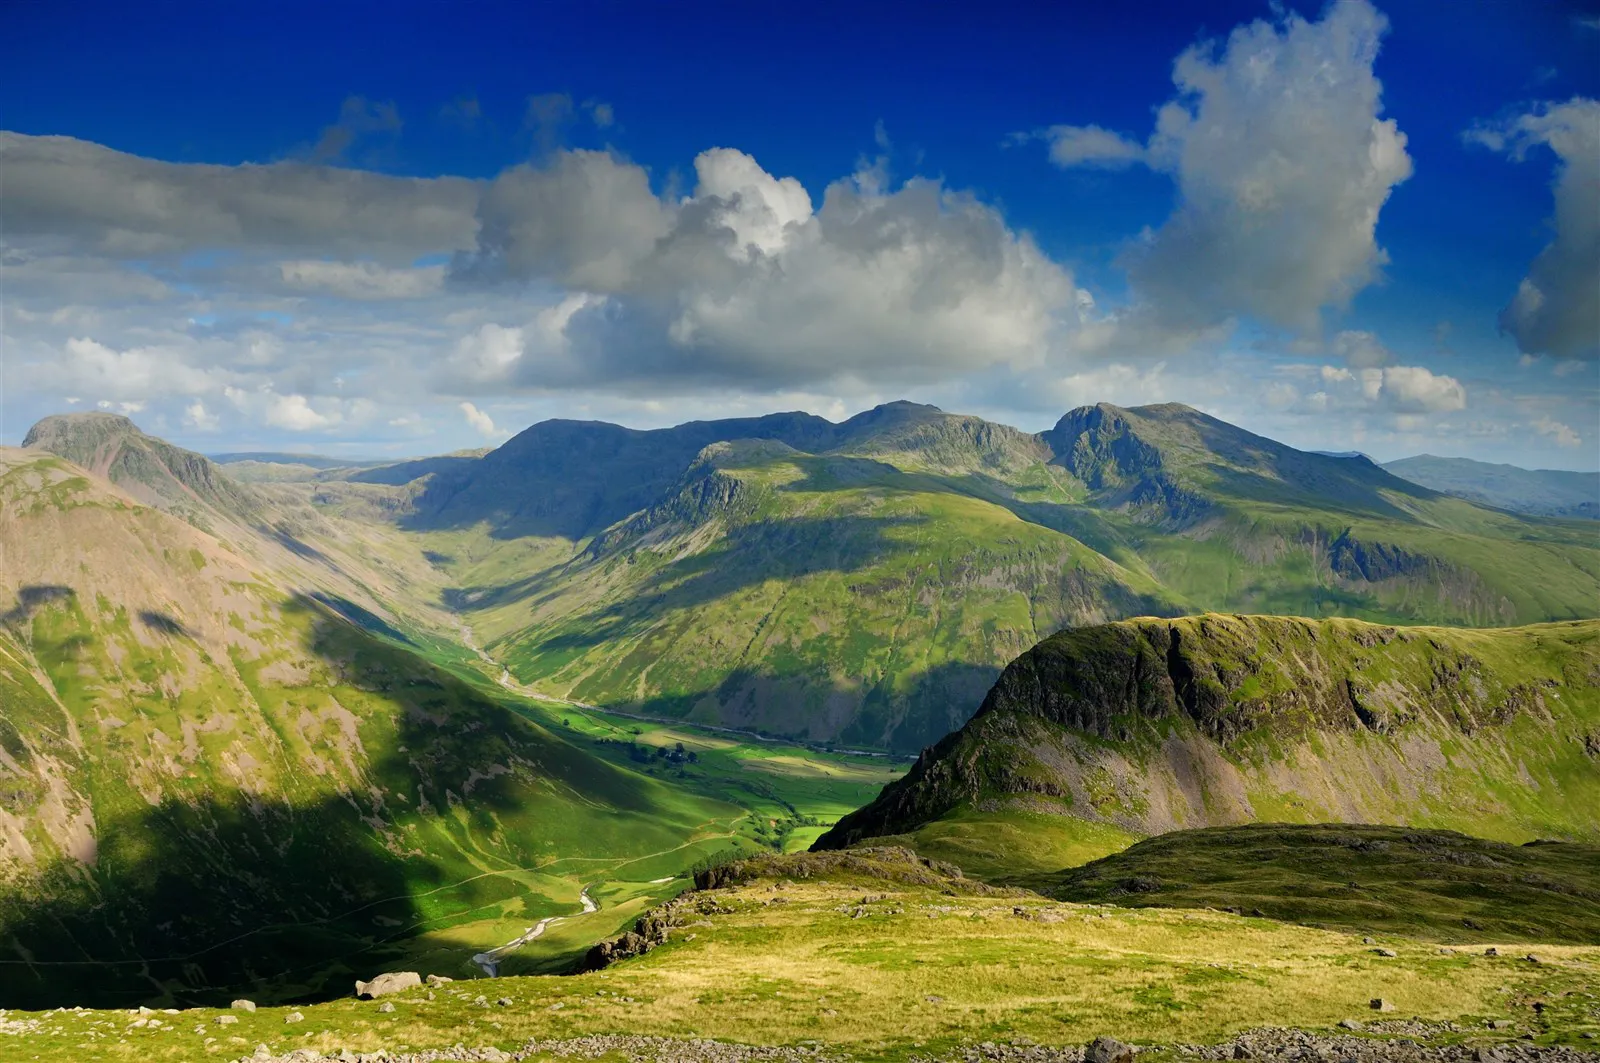 The Lake District National Park in Cumbria